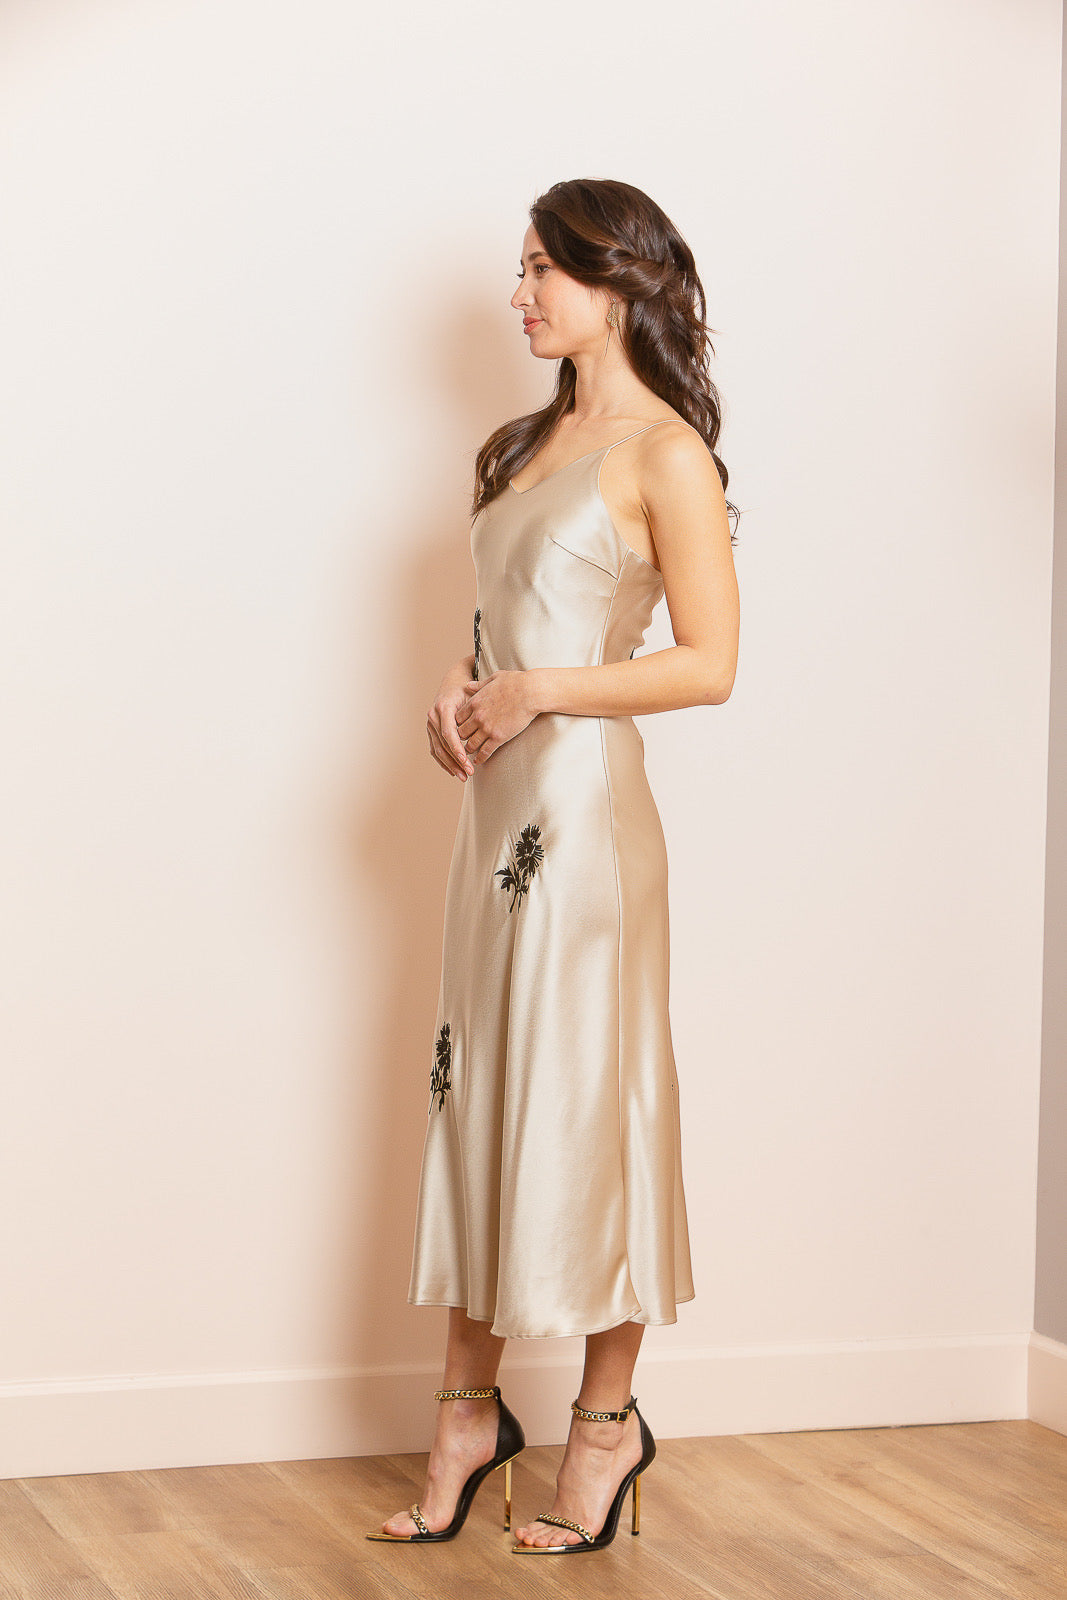 Satin Slip Dress with Flower Embroidery in Champagne